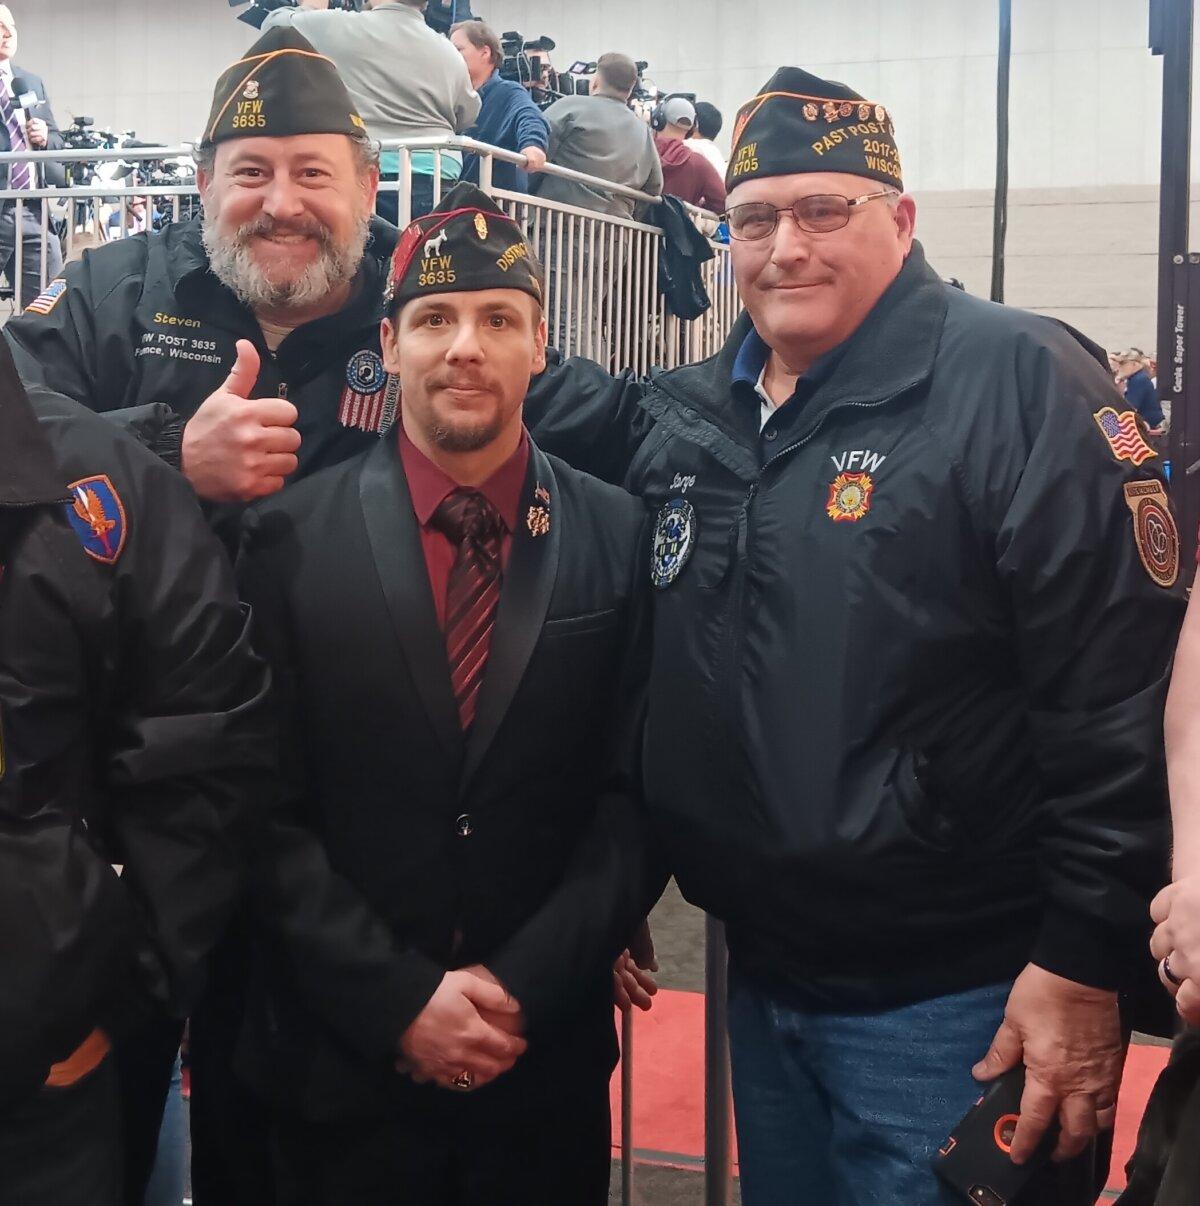 Steven Levine (L), Aaron Volling (C), and Richard Verheyen (R) were among the military veterans gathered to hear President Trump speak in Green Bay, Wis., on April 2, 2024. (Nathan Worcester/The Epoch Times)